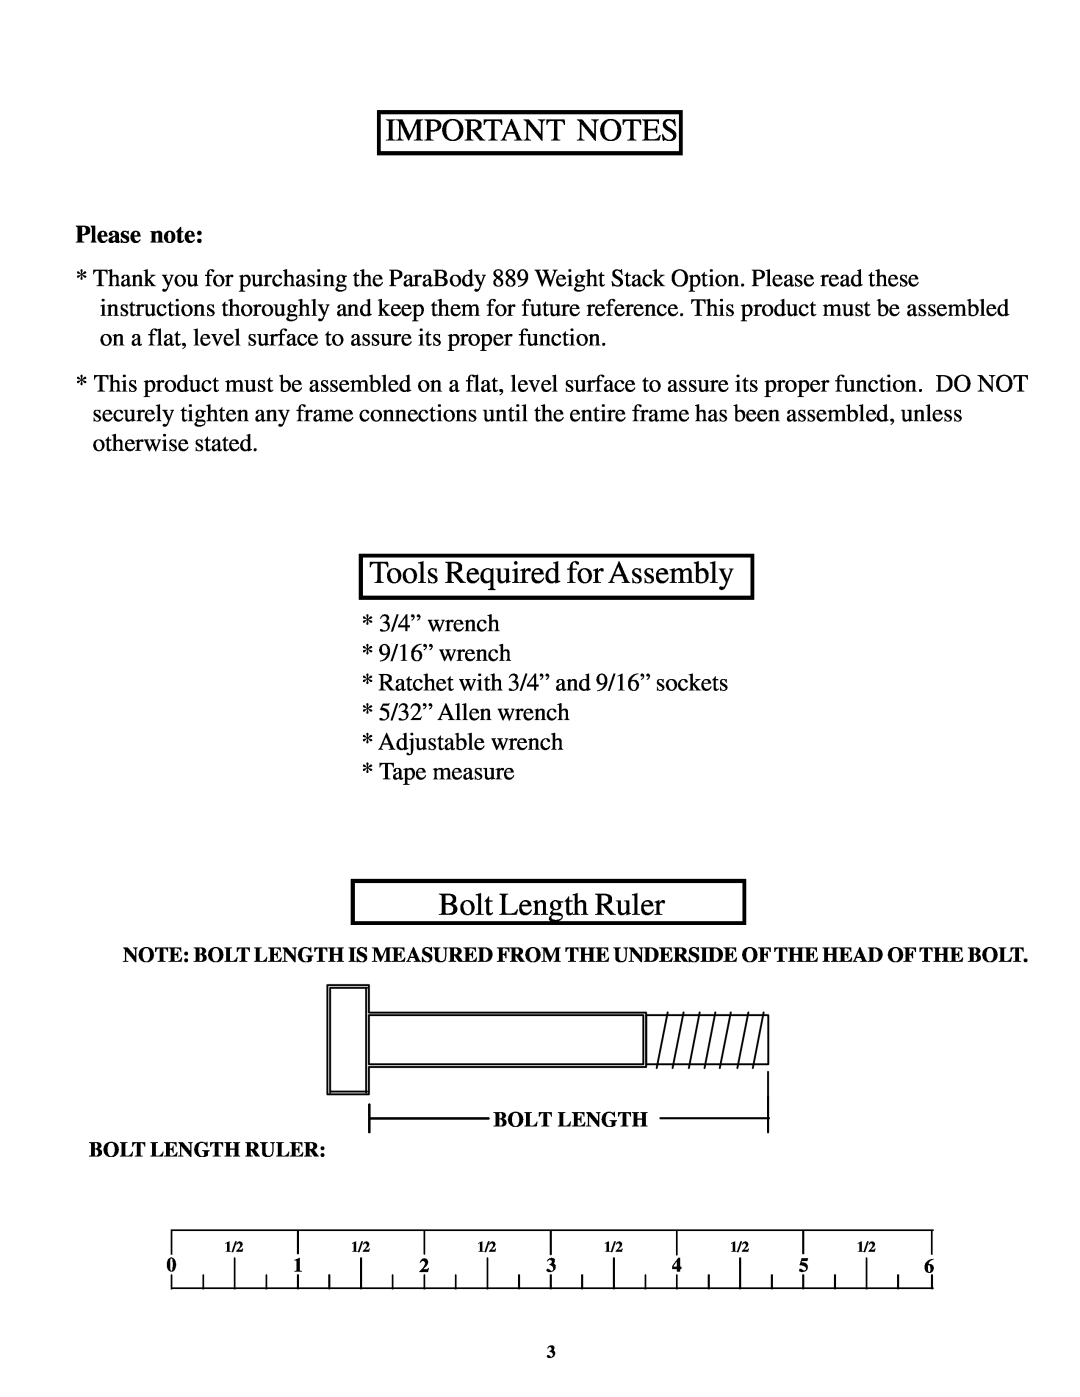 ParaBody 889 manual Important Notes, Tools Required for Assembly, Bolt Length Ruler, Please note 